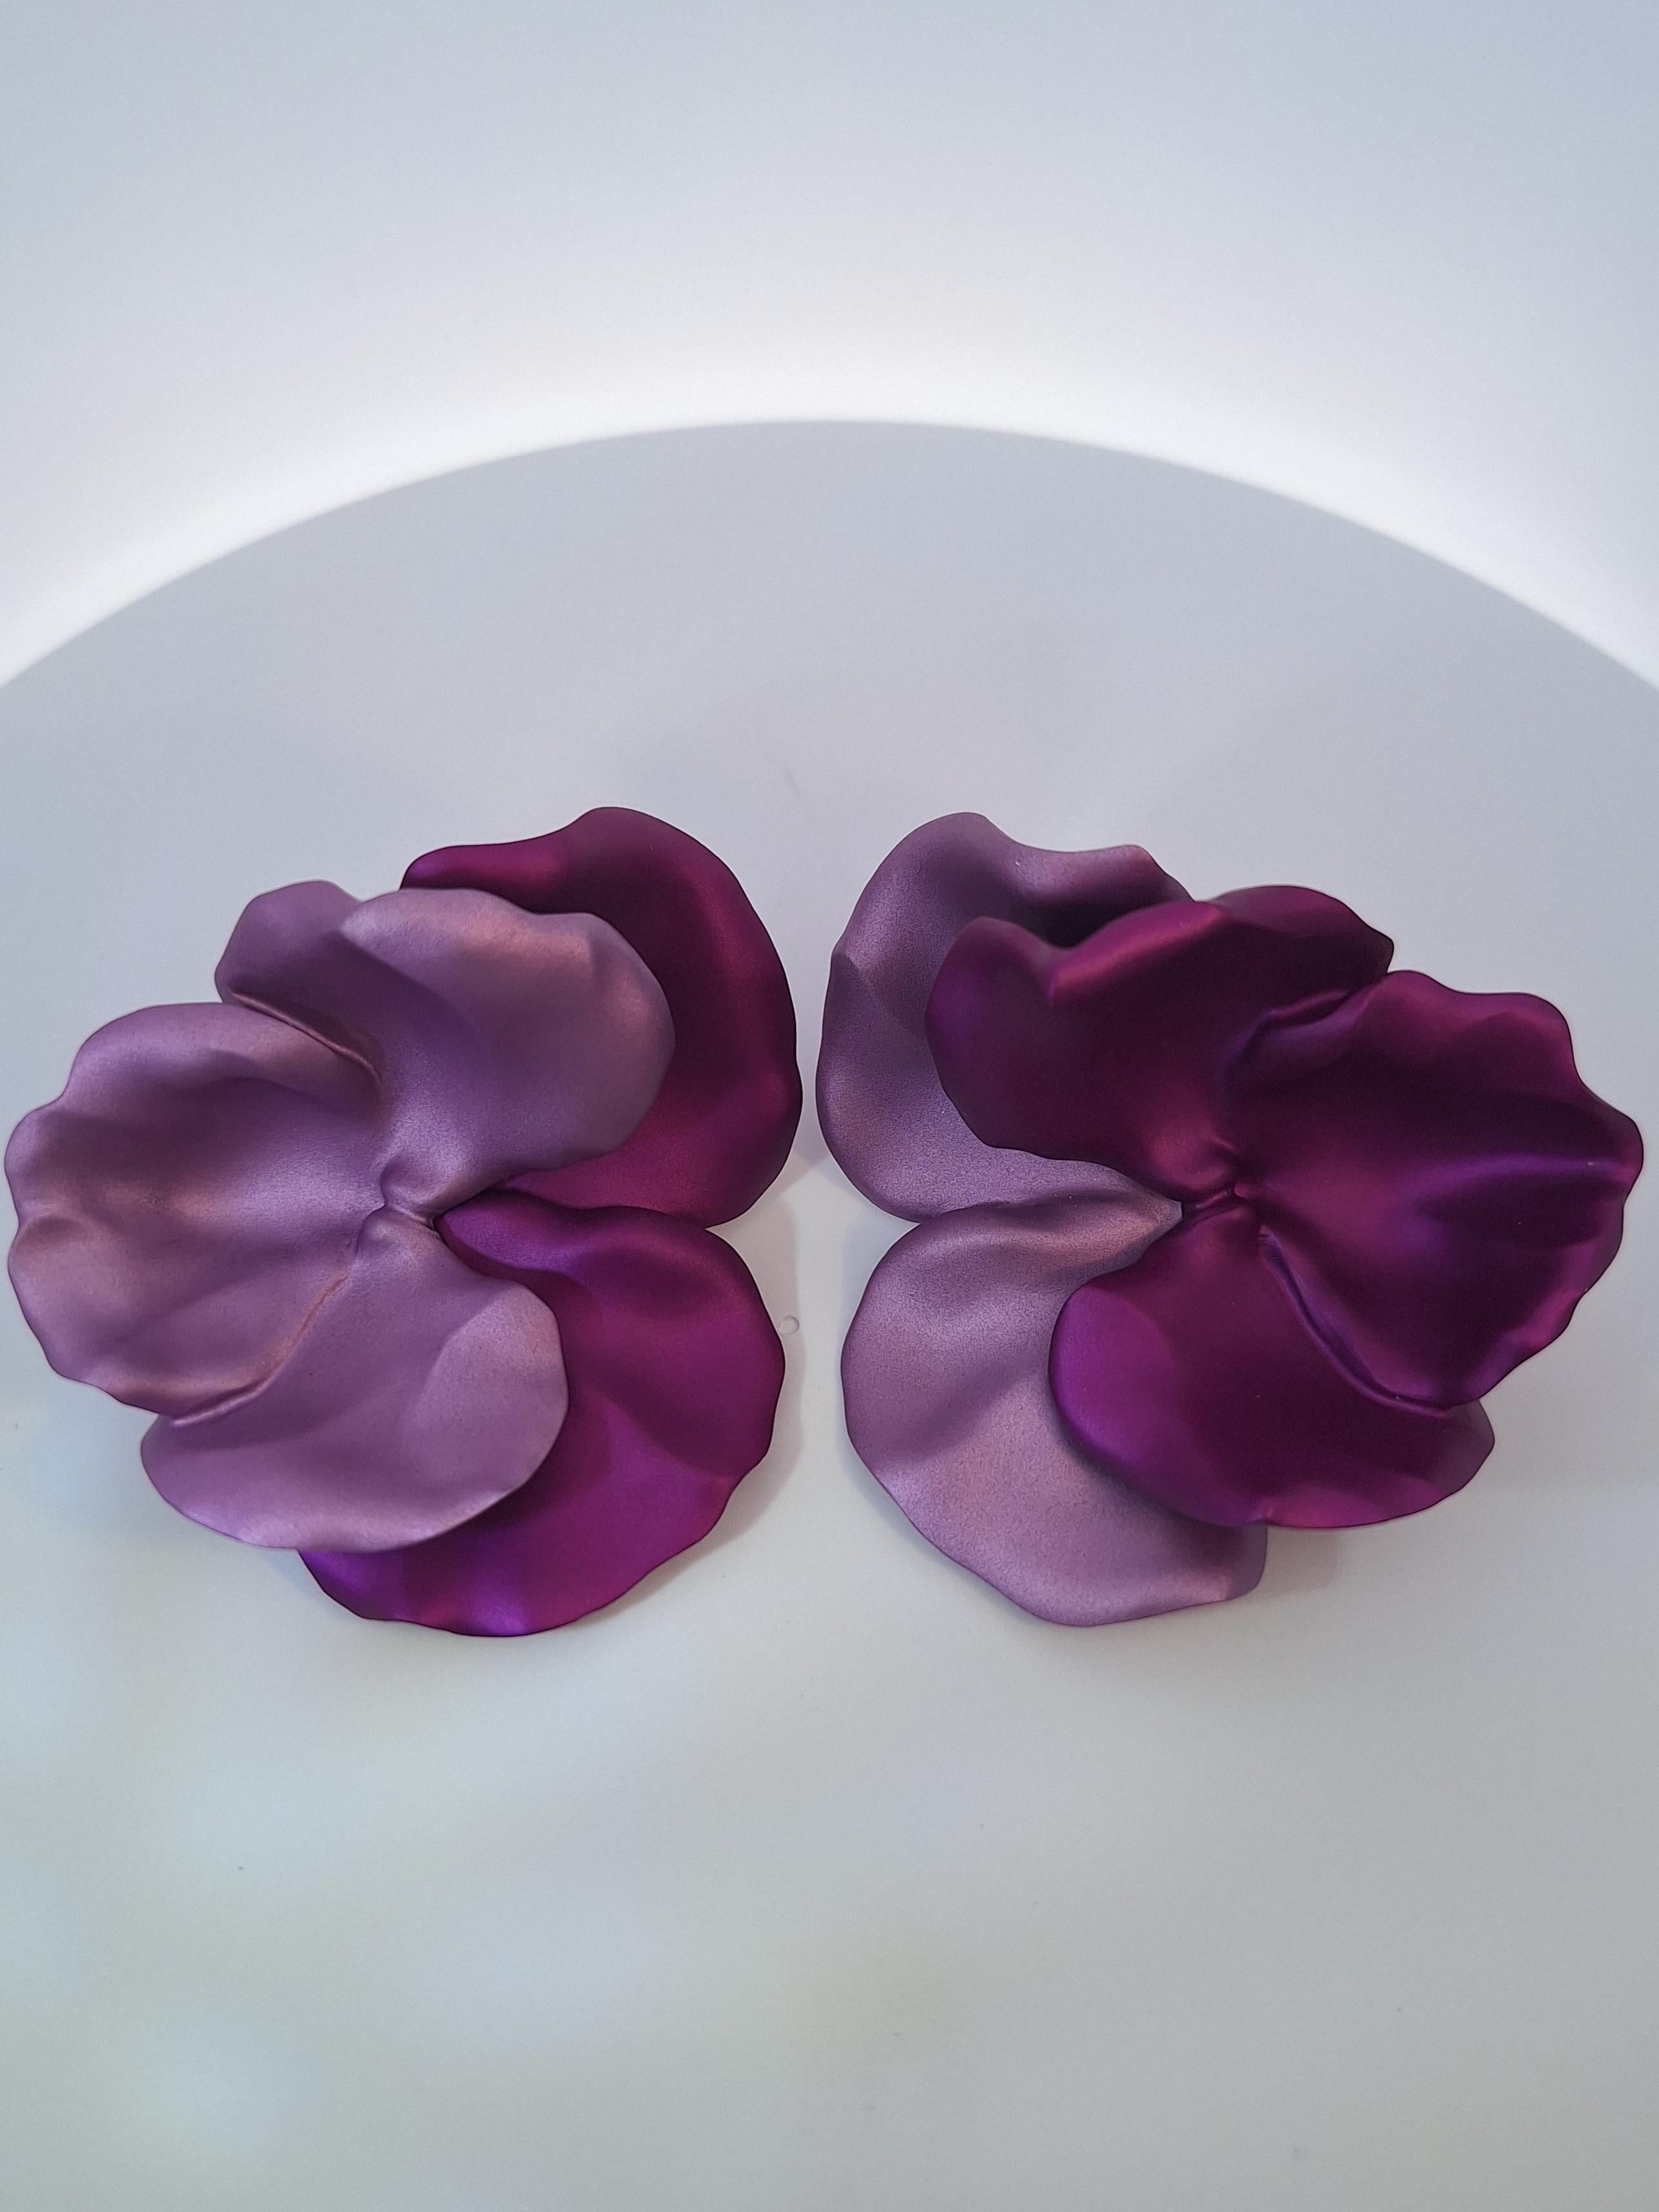 Jar Paris Pansies Purple Aluminium Gold Earrings In Excellent Condition For Sale In New York, NY